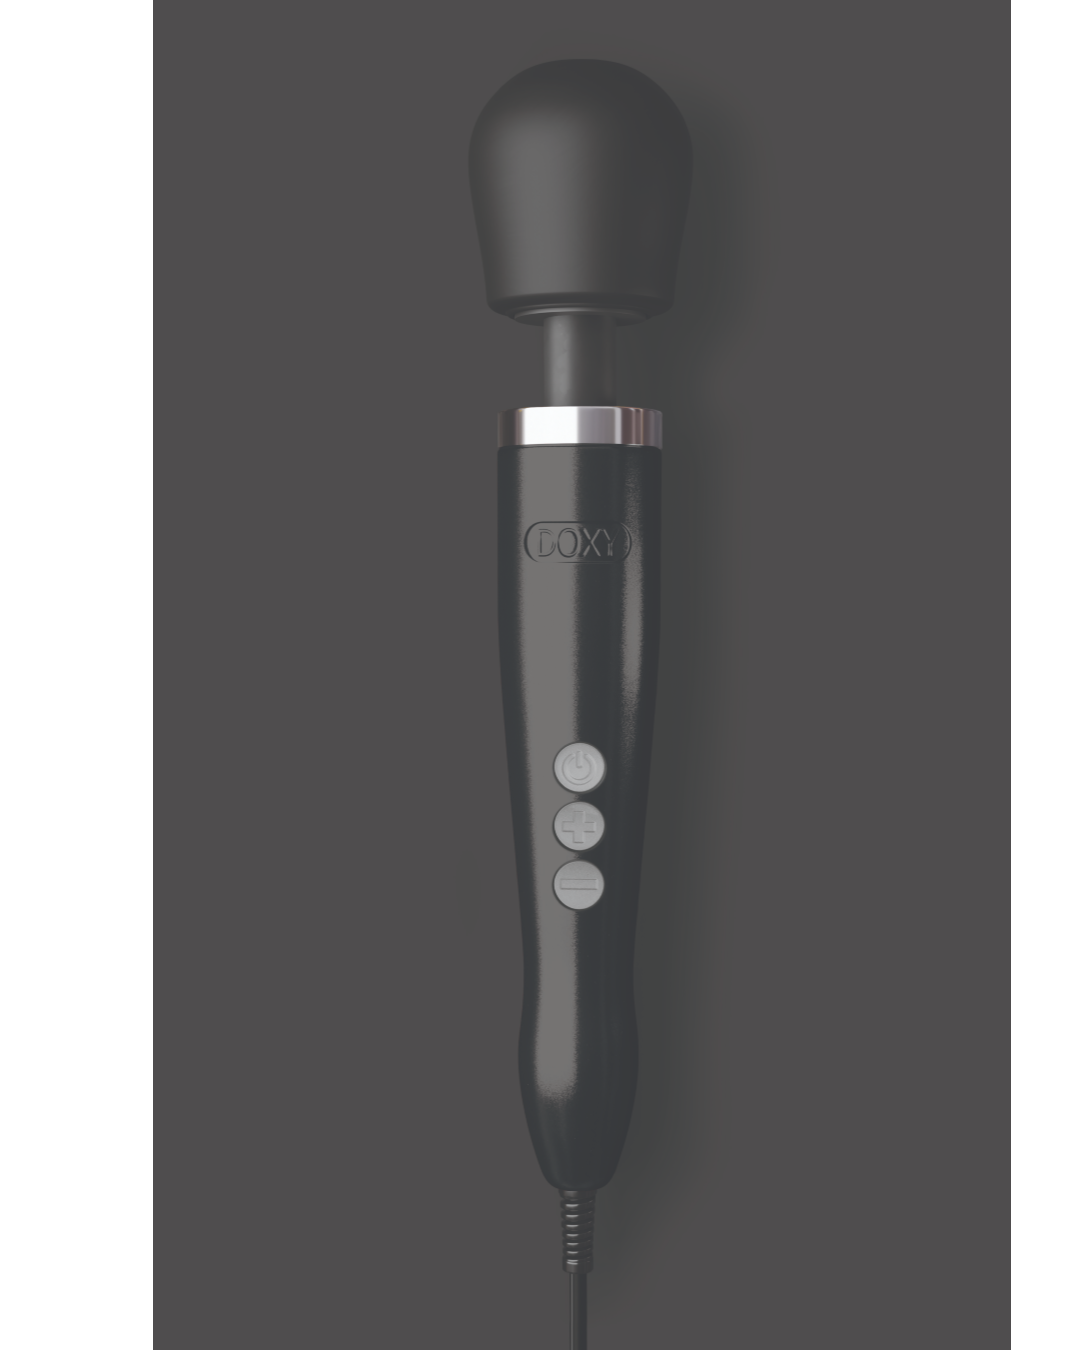 Doxy Die Cast Extra Powerful Wand Vibrator - Black against a contrasting grey background showing the buttons